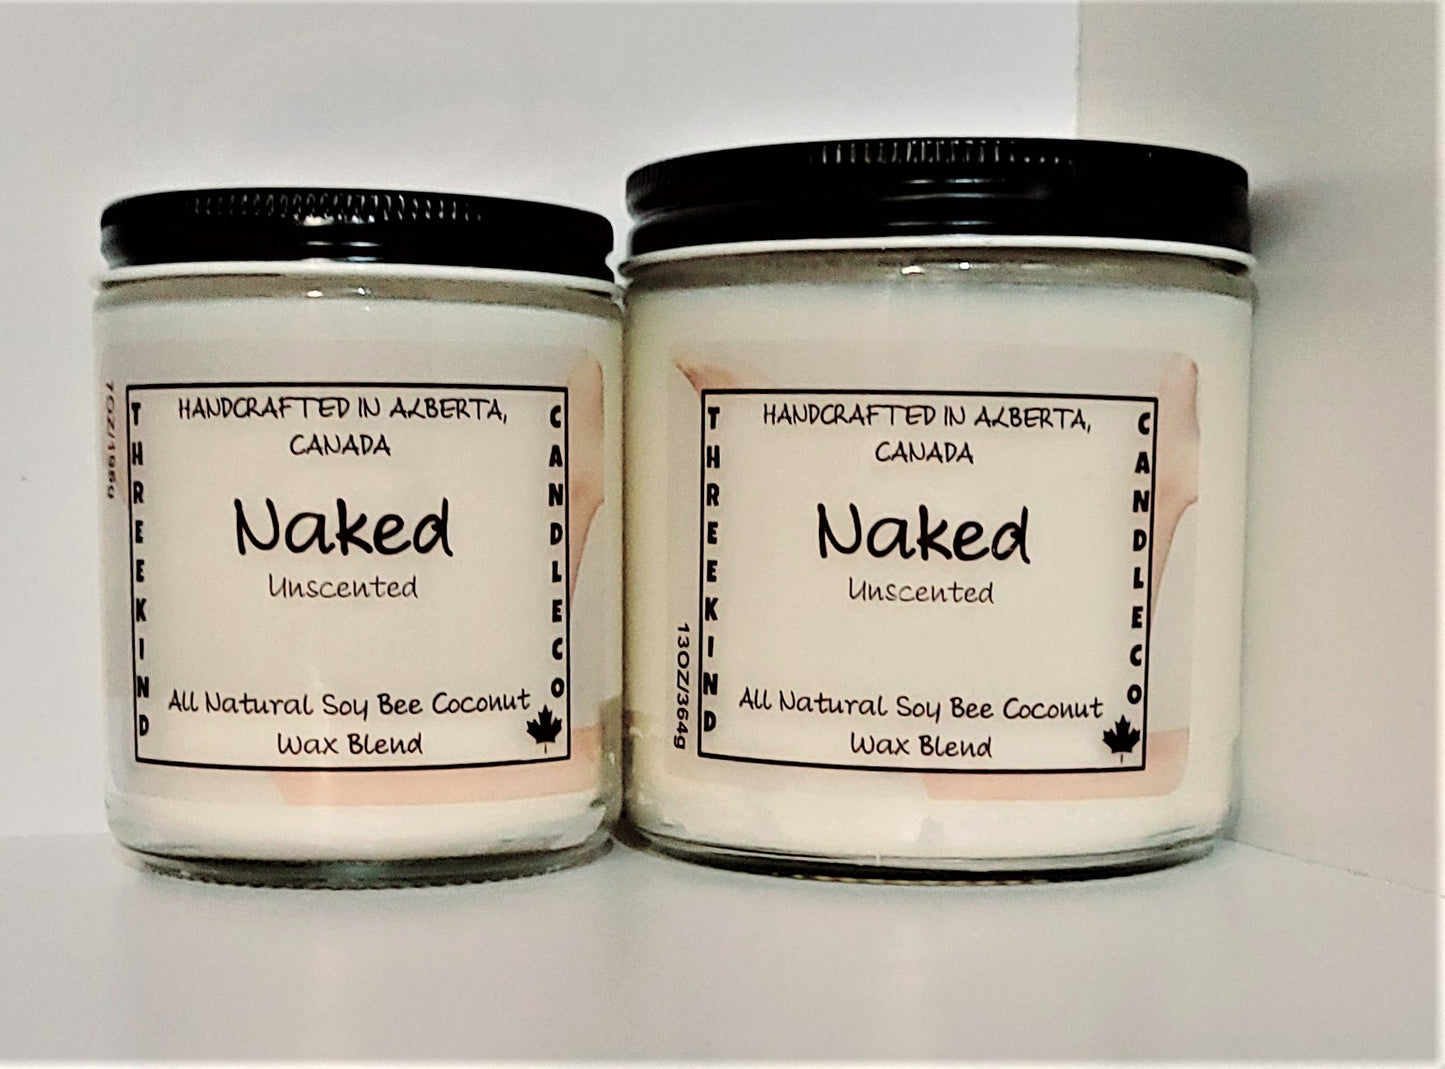 NAKED (unscented)